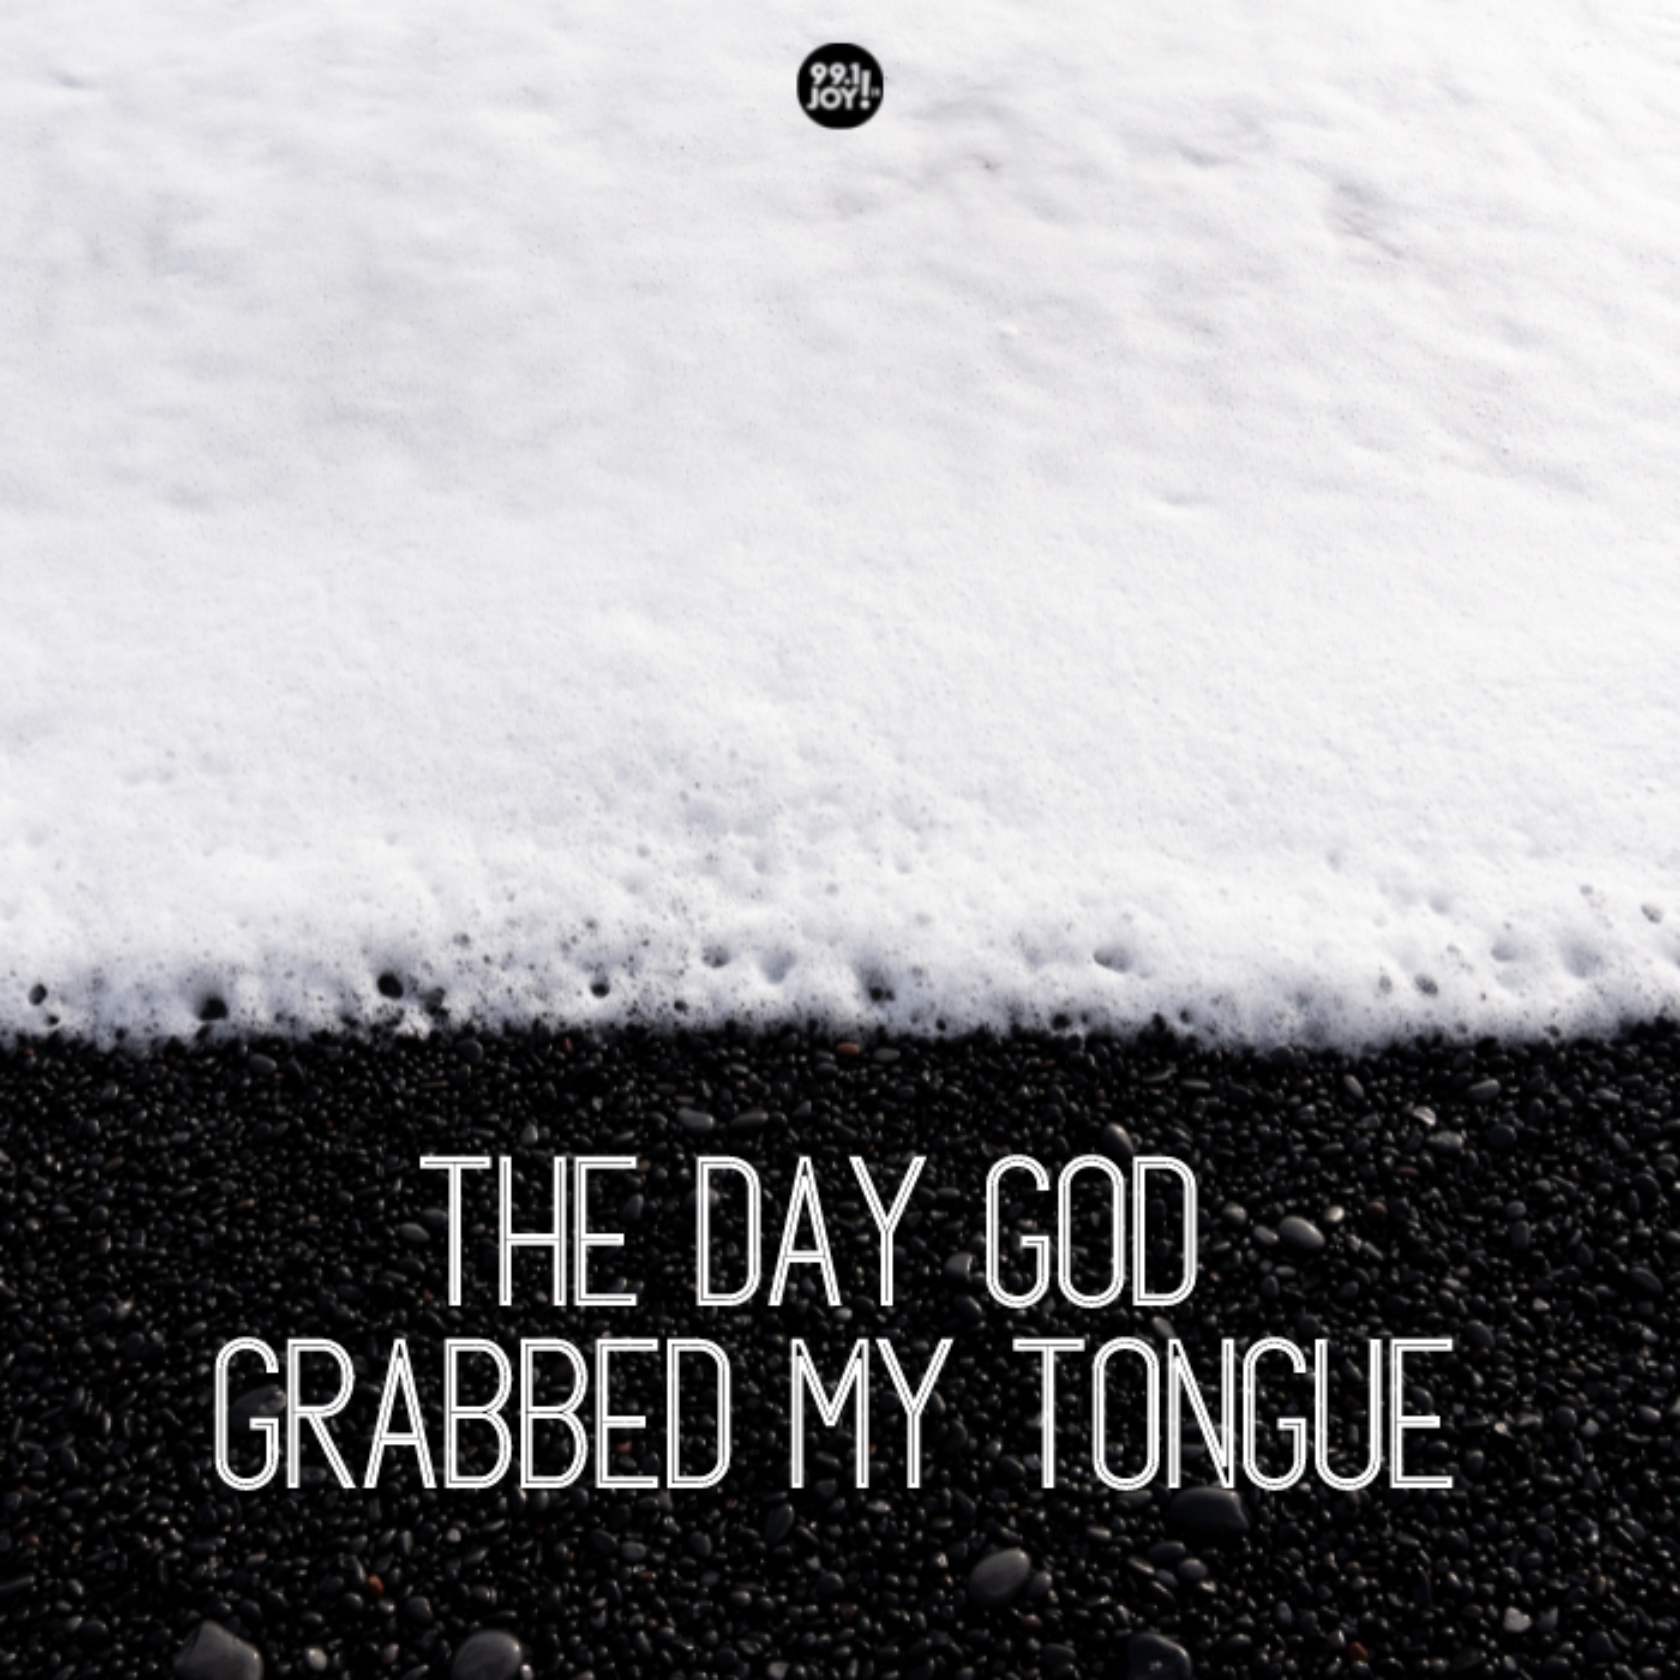 The Day God Grabbed My Tongue